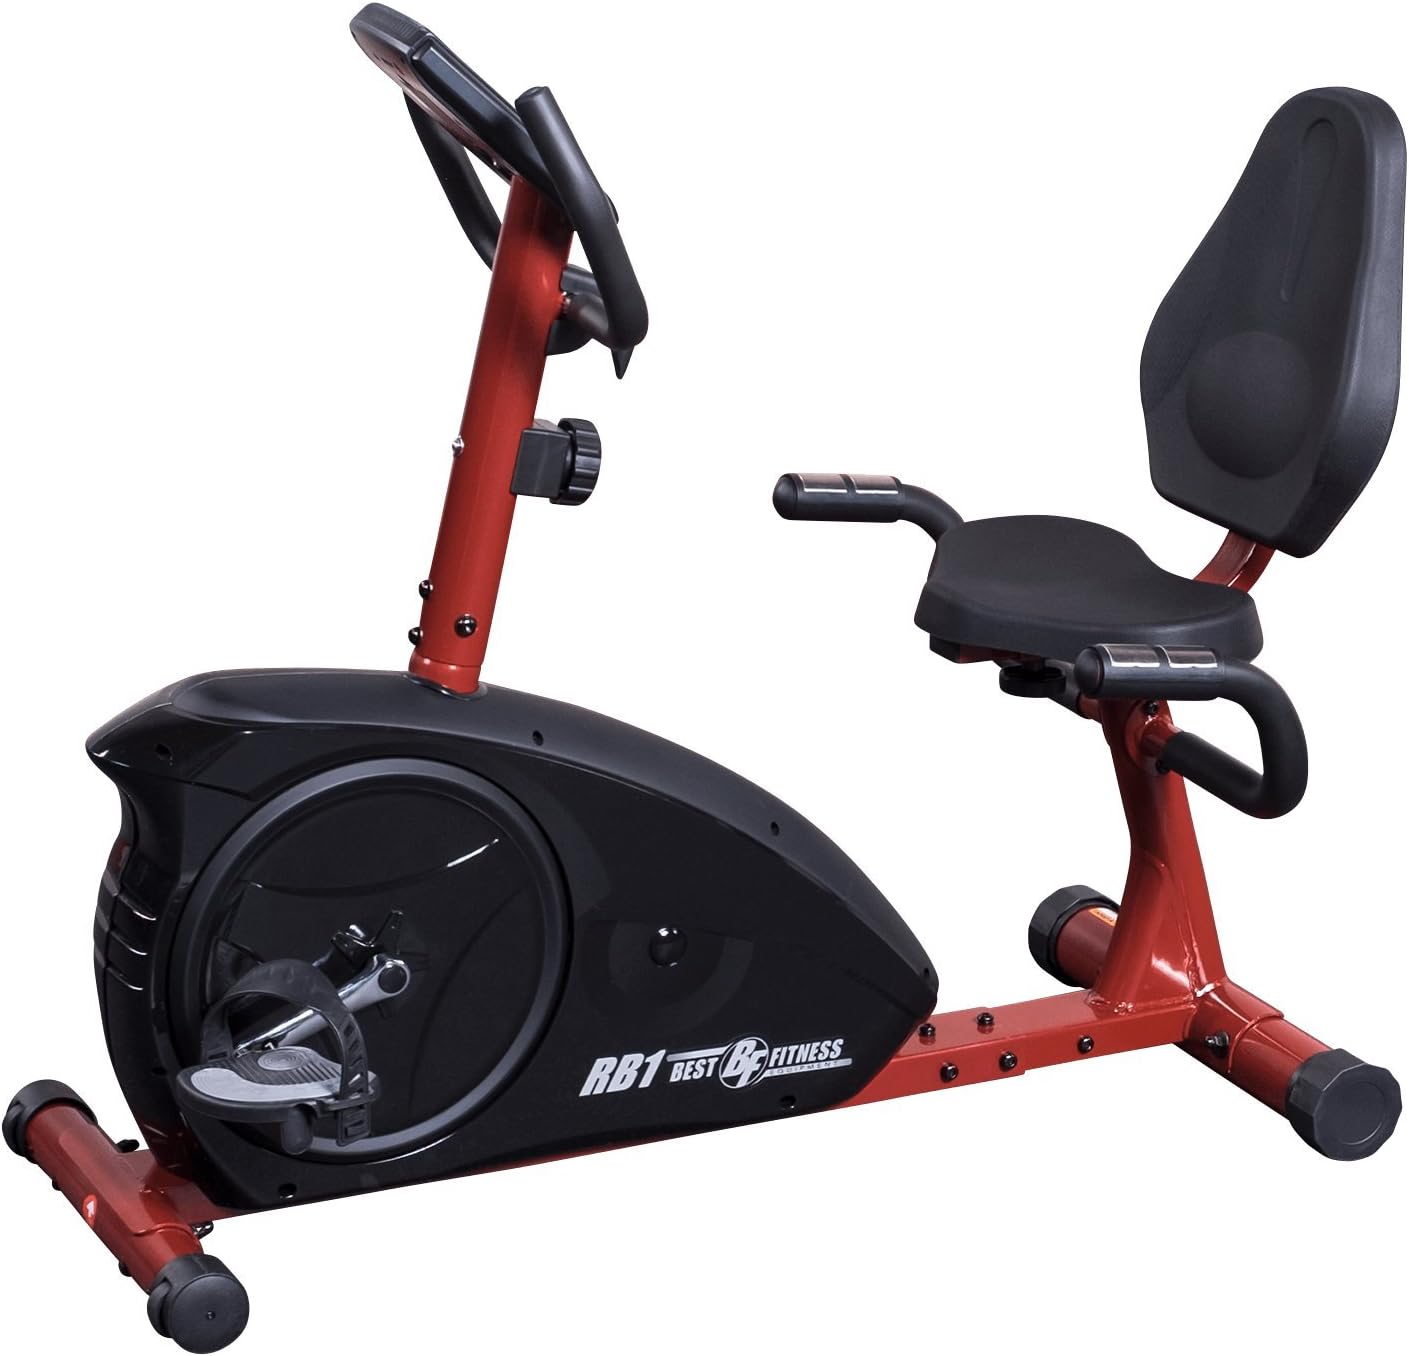 Body-Solid Best Fitness BFRB1 Recumbent Bike Review